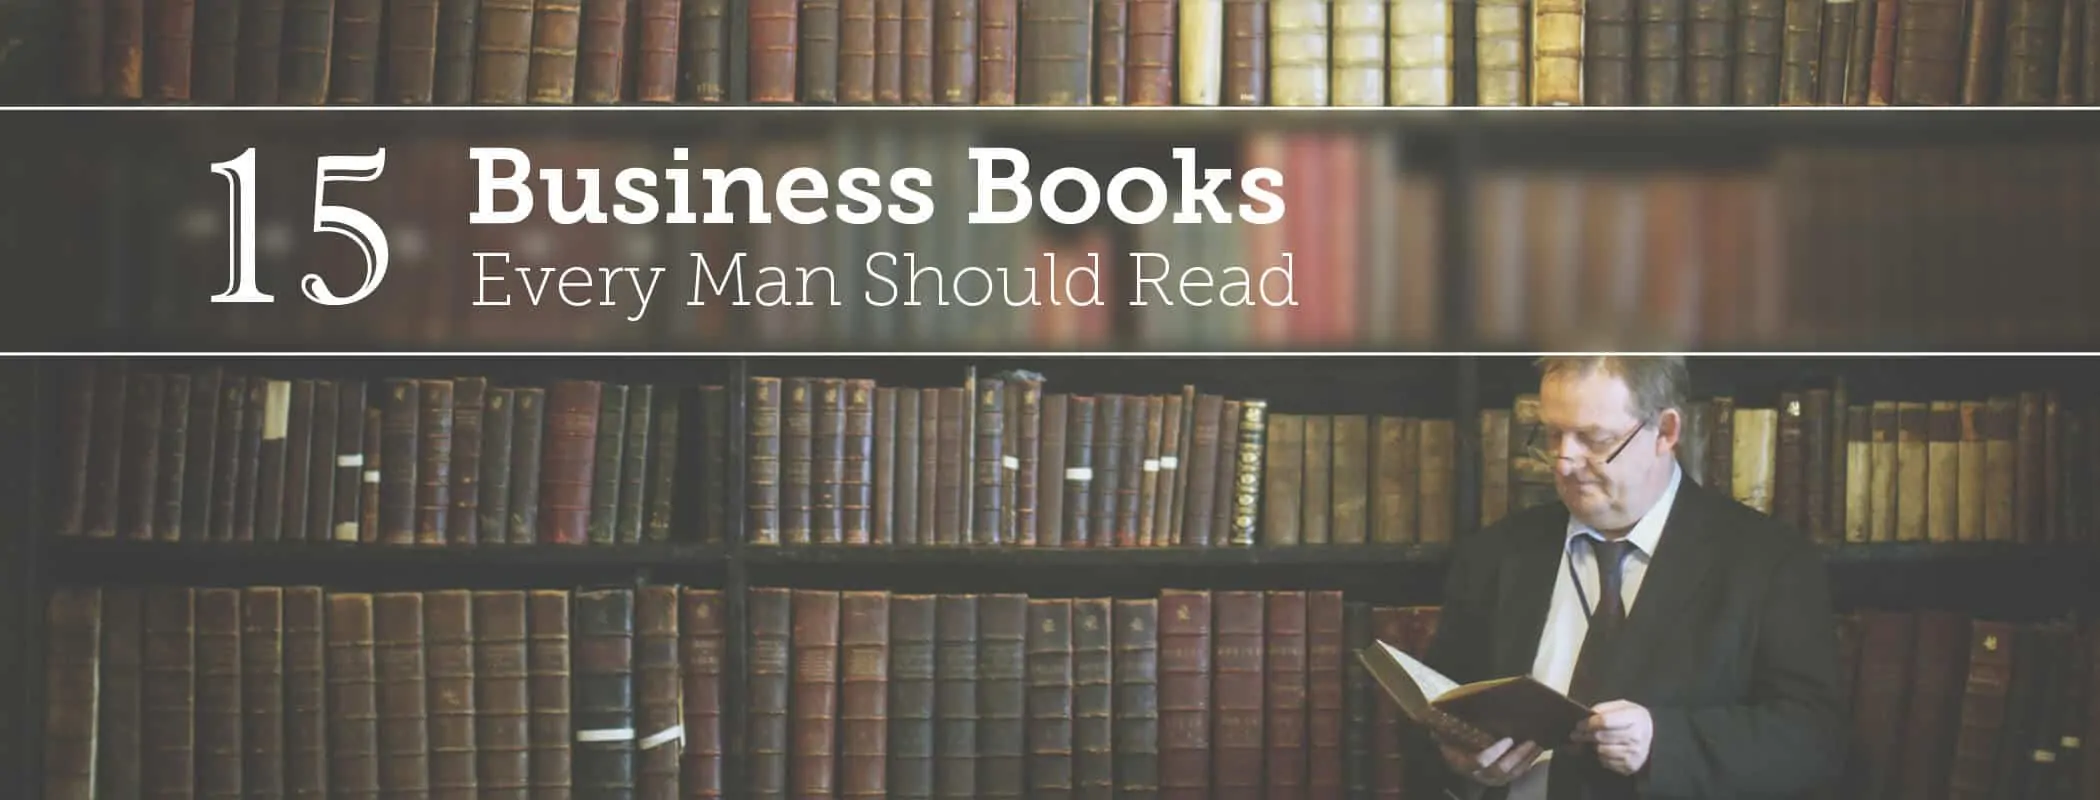 15 Business Books You Should Read